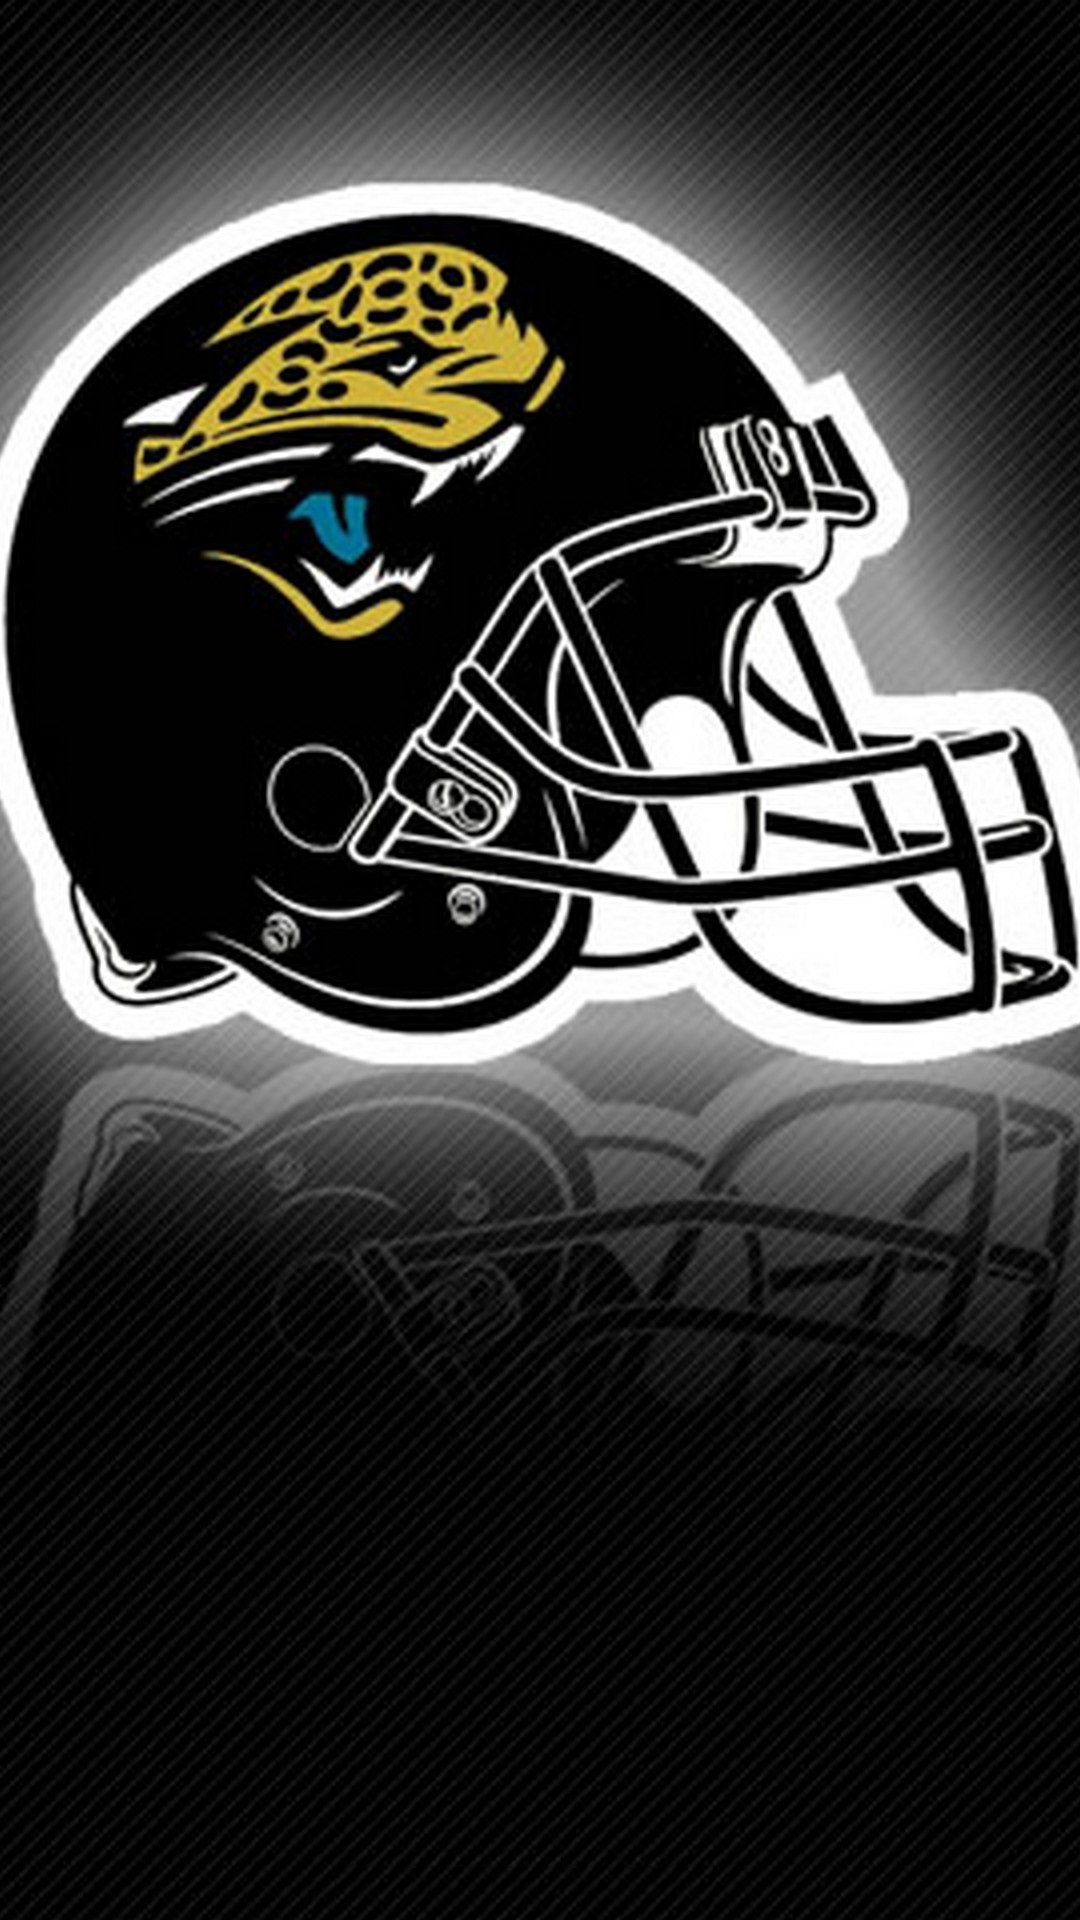 Wallpapers iPhone Jacksonville Jaguars NFL with high-resolution 1080x1920 pixel. Donwload and set as wallpaper for your iPhone X, iPhone XS home screen backgrounds, XS Max, XR, iPhone8 lock screen wallpaper, iPhone 7, 6, SE and other mobile devices